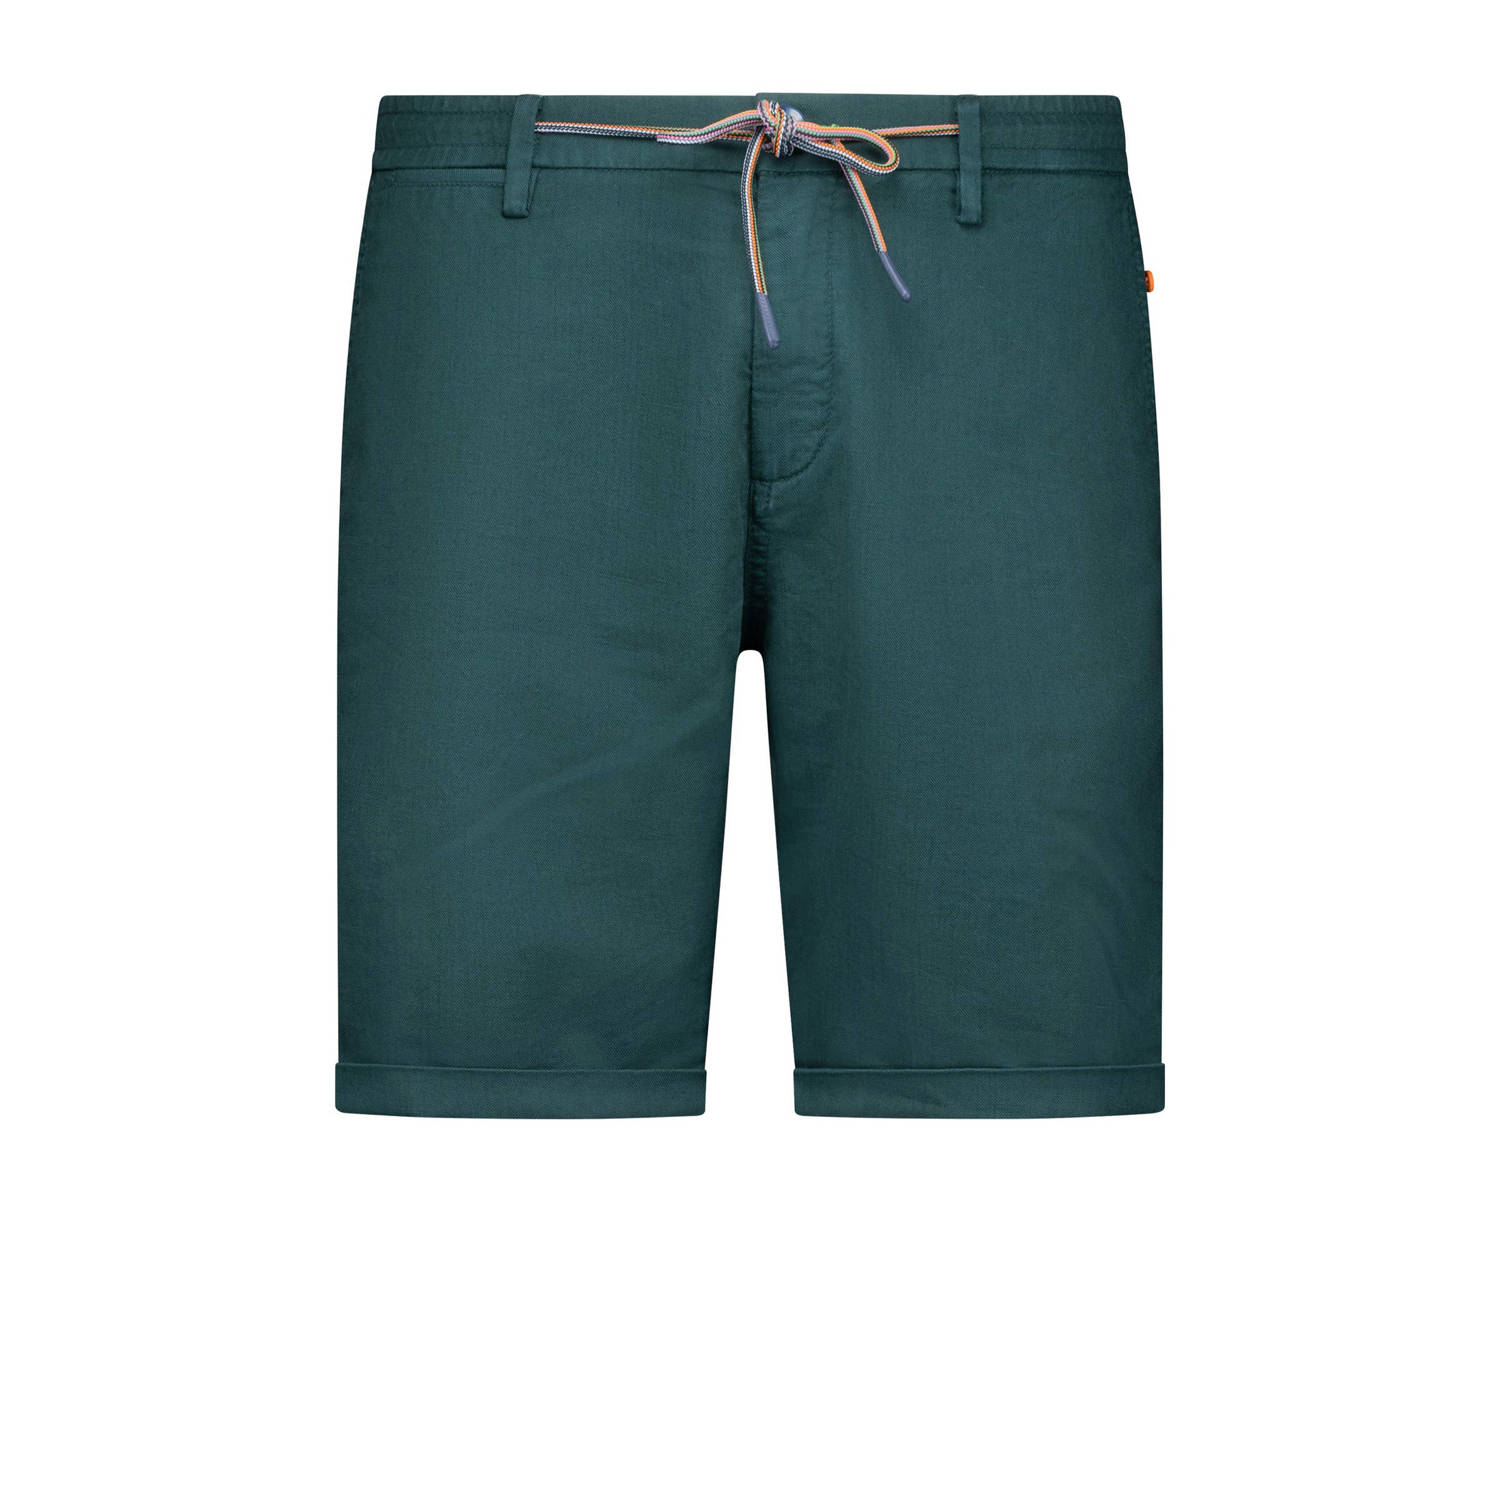 New Zealand Auckland regular fit short The Bankers soft olive